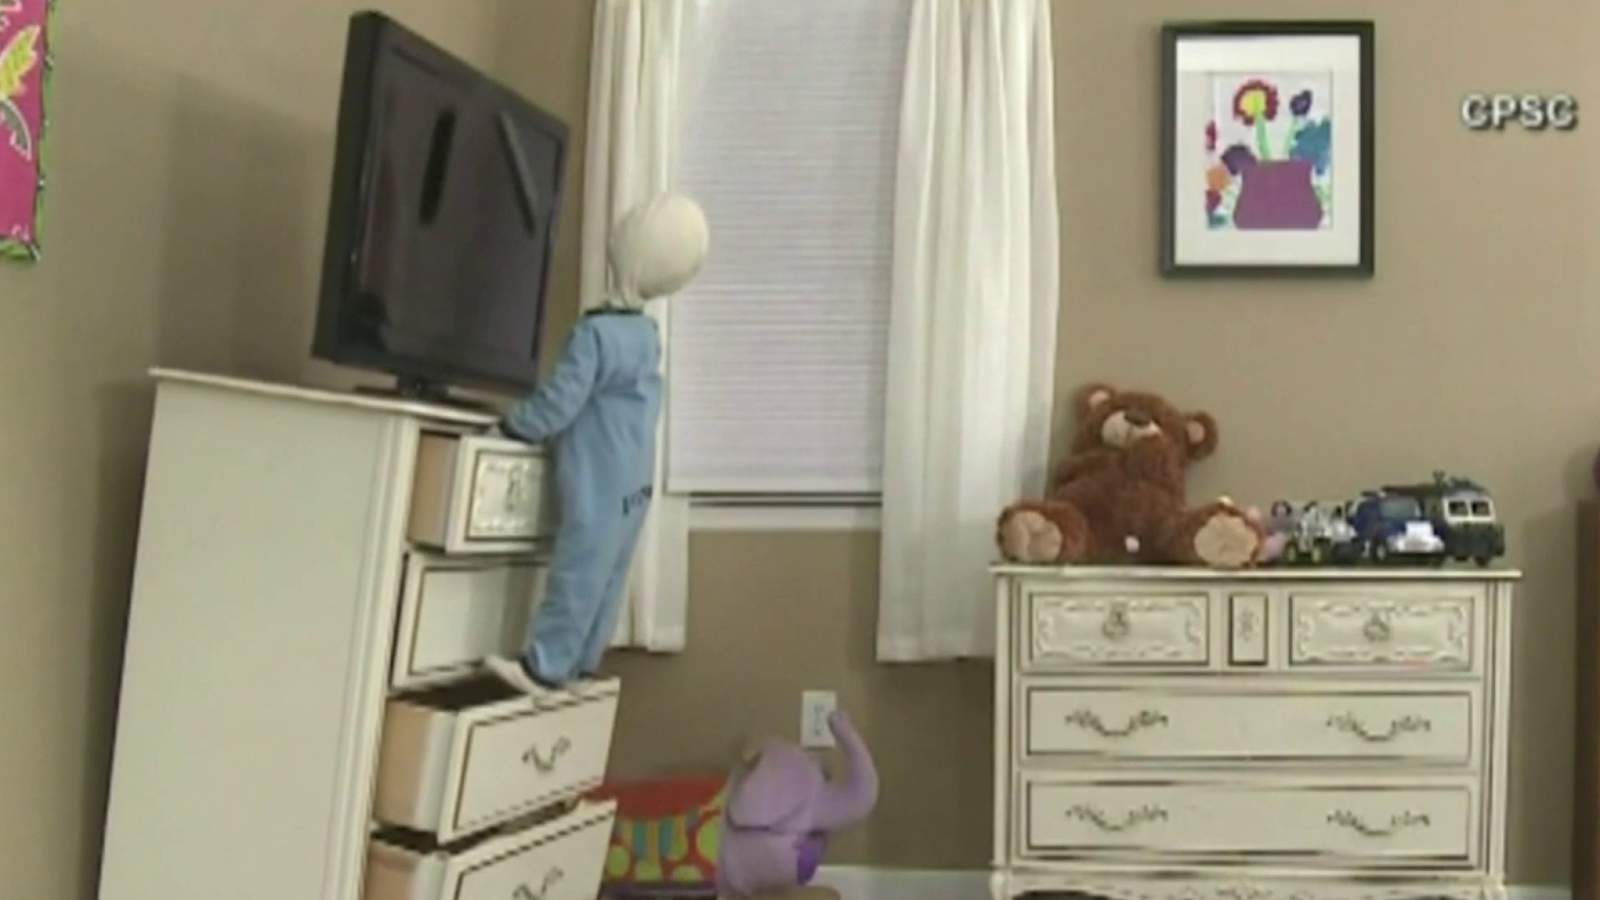 ‘Anchor it’: Tips to protect children from furniture, TVs tipping over